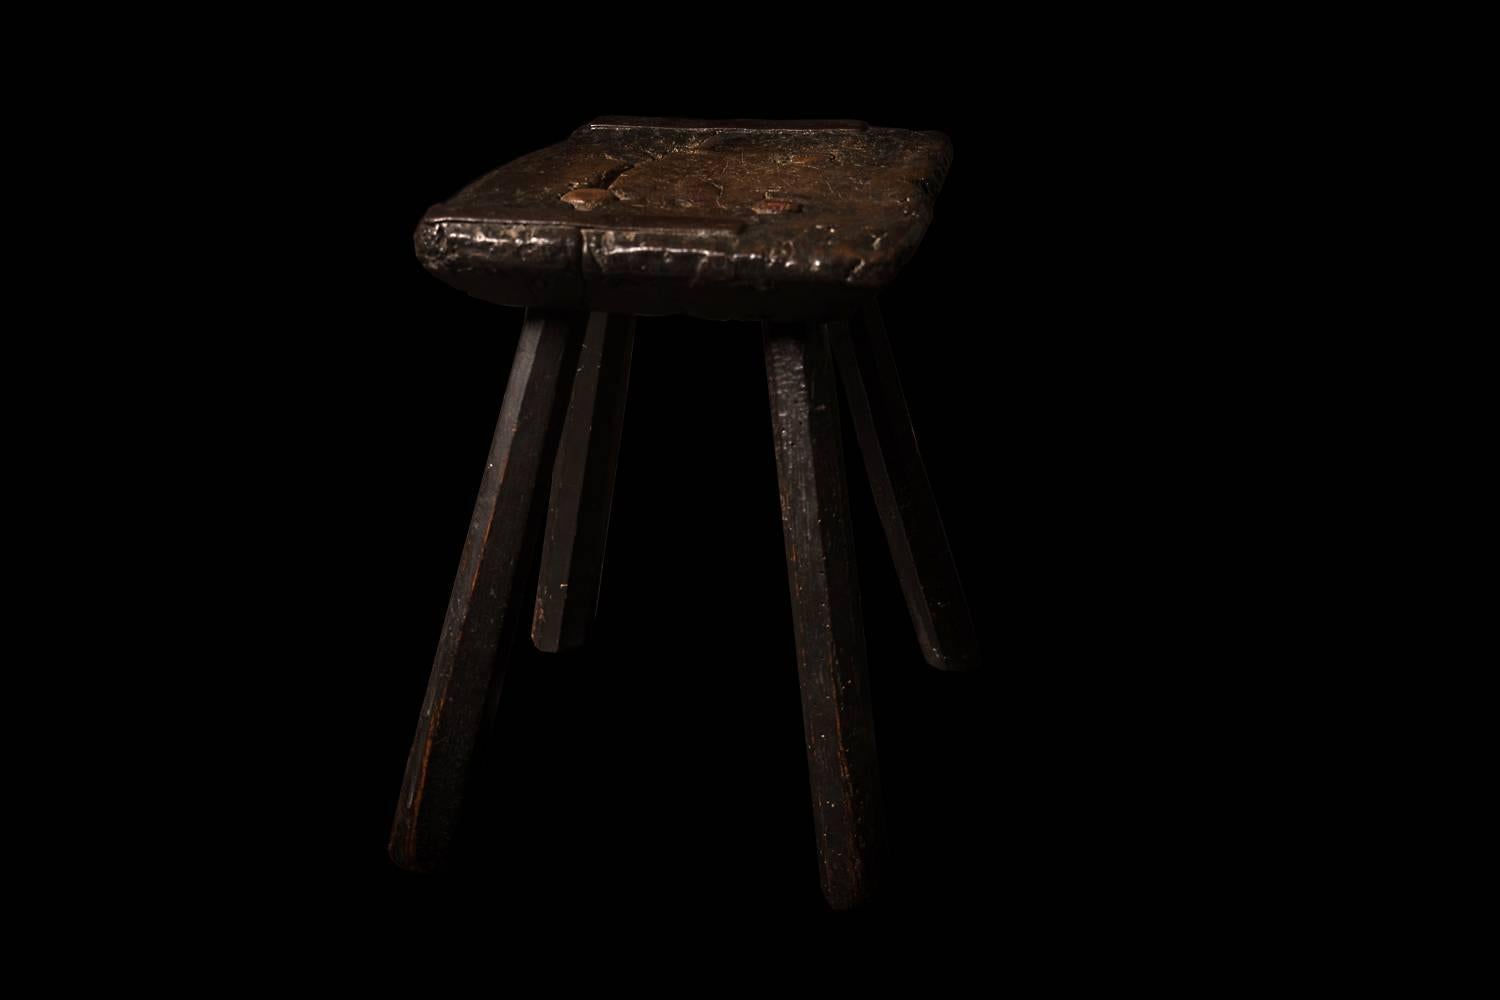 A charming 18th century English Provincial oak stool. The rectangular knarled top raised on four chamfered legs and retaining later village farrier style iron strengthening brackets, most likely a 19th century repair for a family 